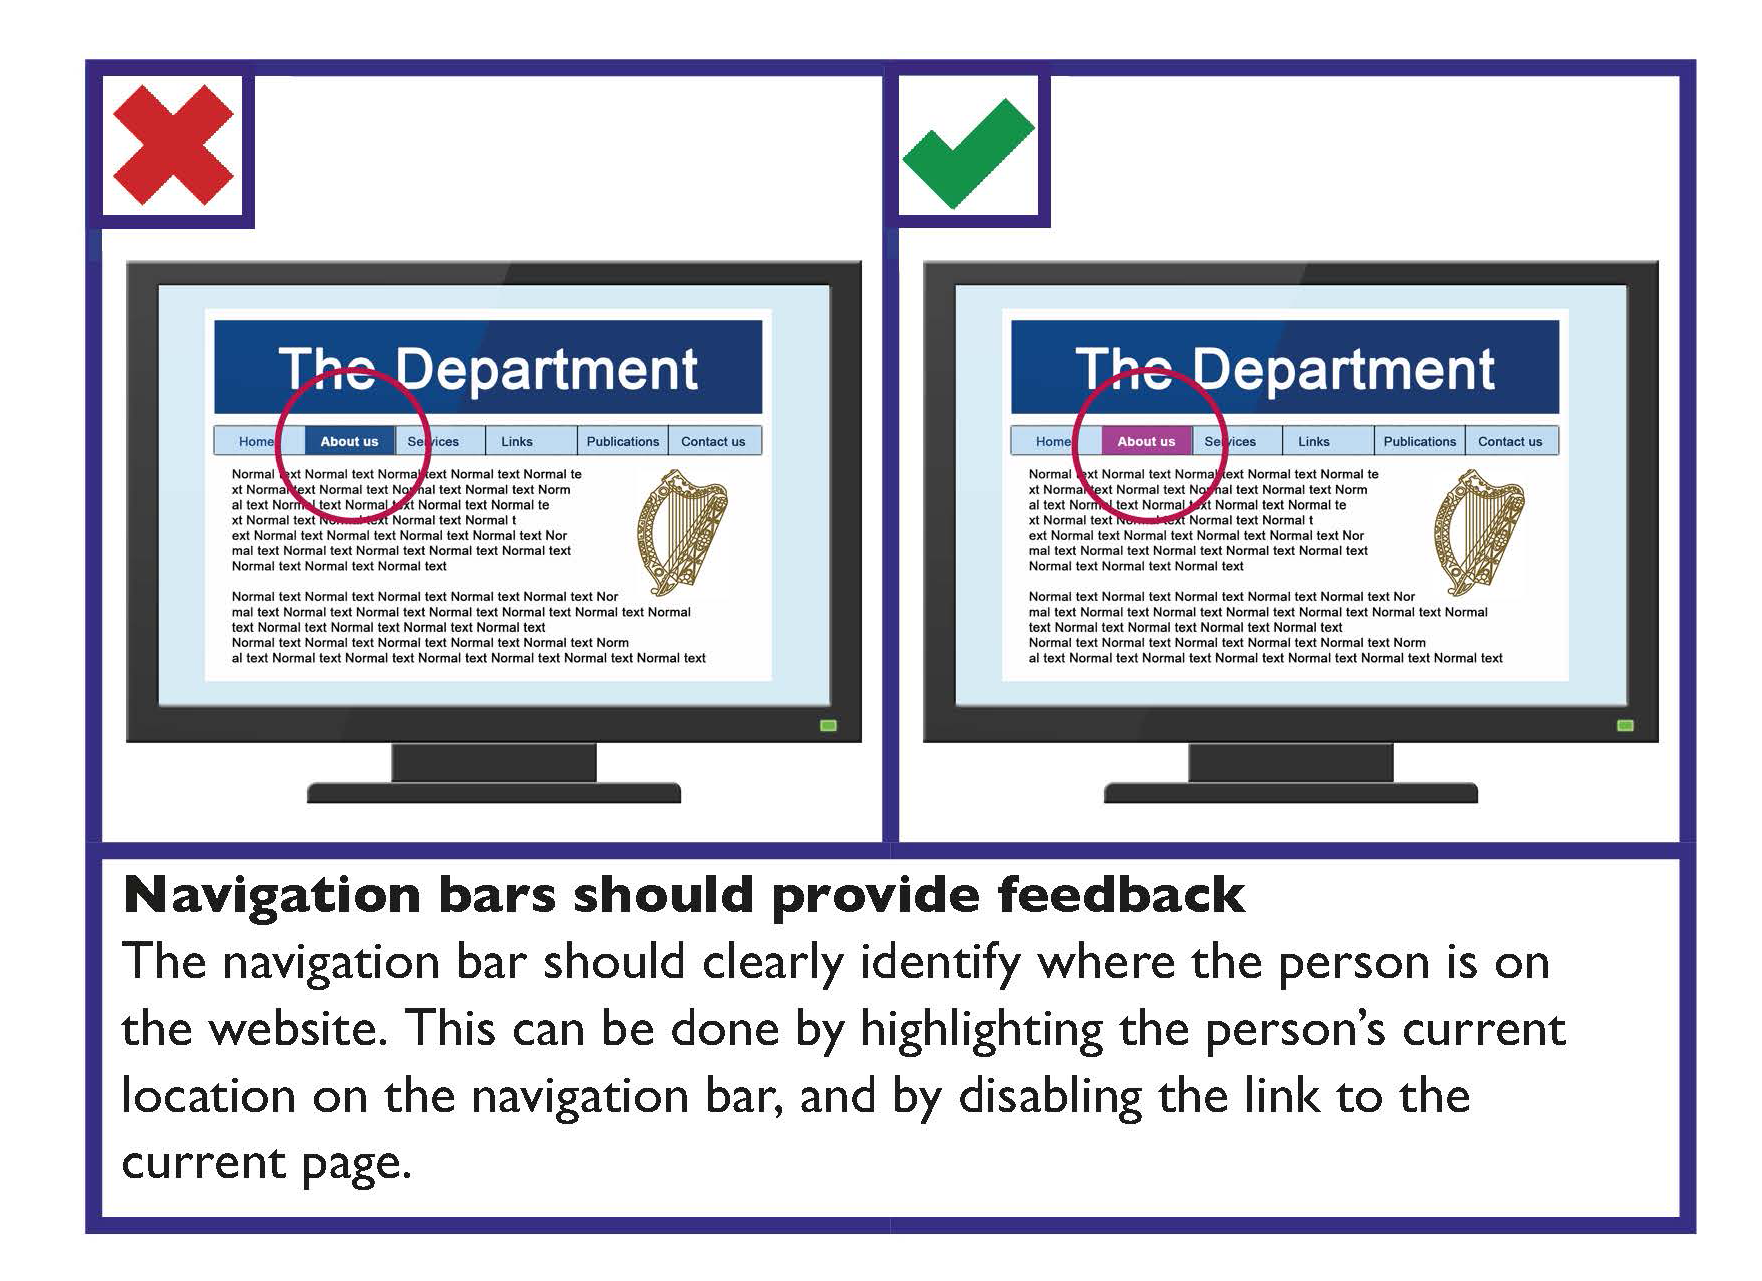 Example of good website design. Navigation bars should provide feedback an clearly identify where the person is on the website. This can be done by highlighting the current location on the website and disabling the link to the current page.